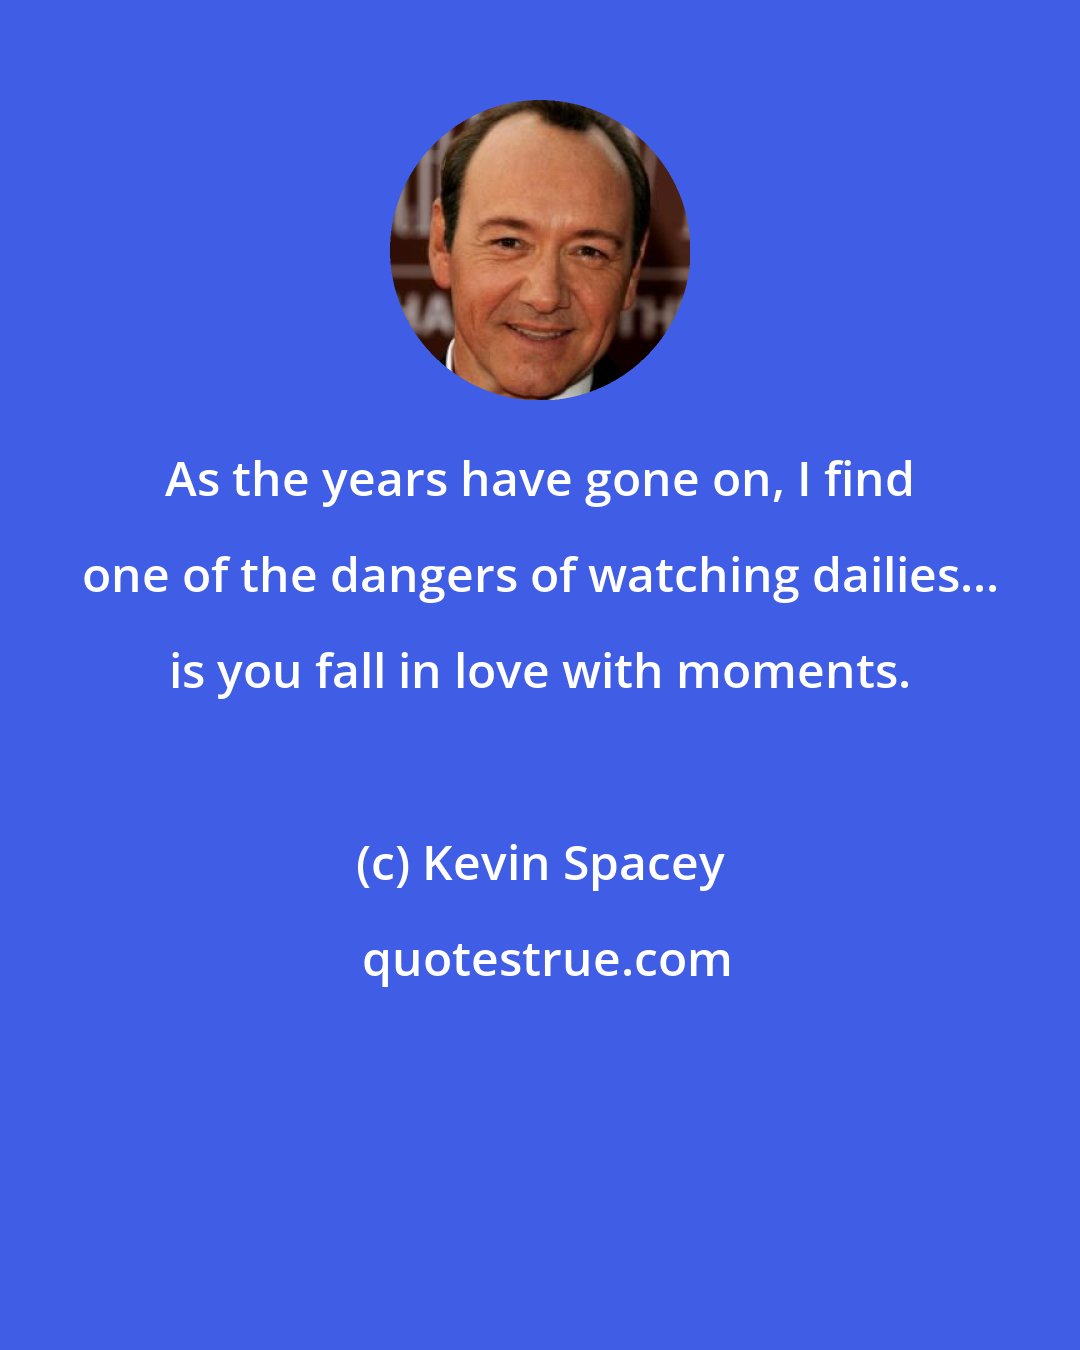 Kevin Spacey: As the years have gone on, I find one of the dangers of watching dailies... is you fall in love with moments.